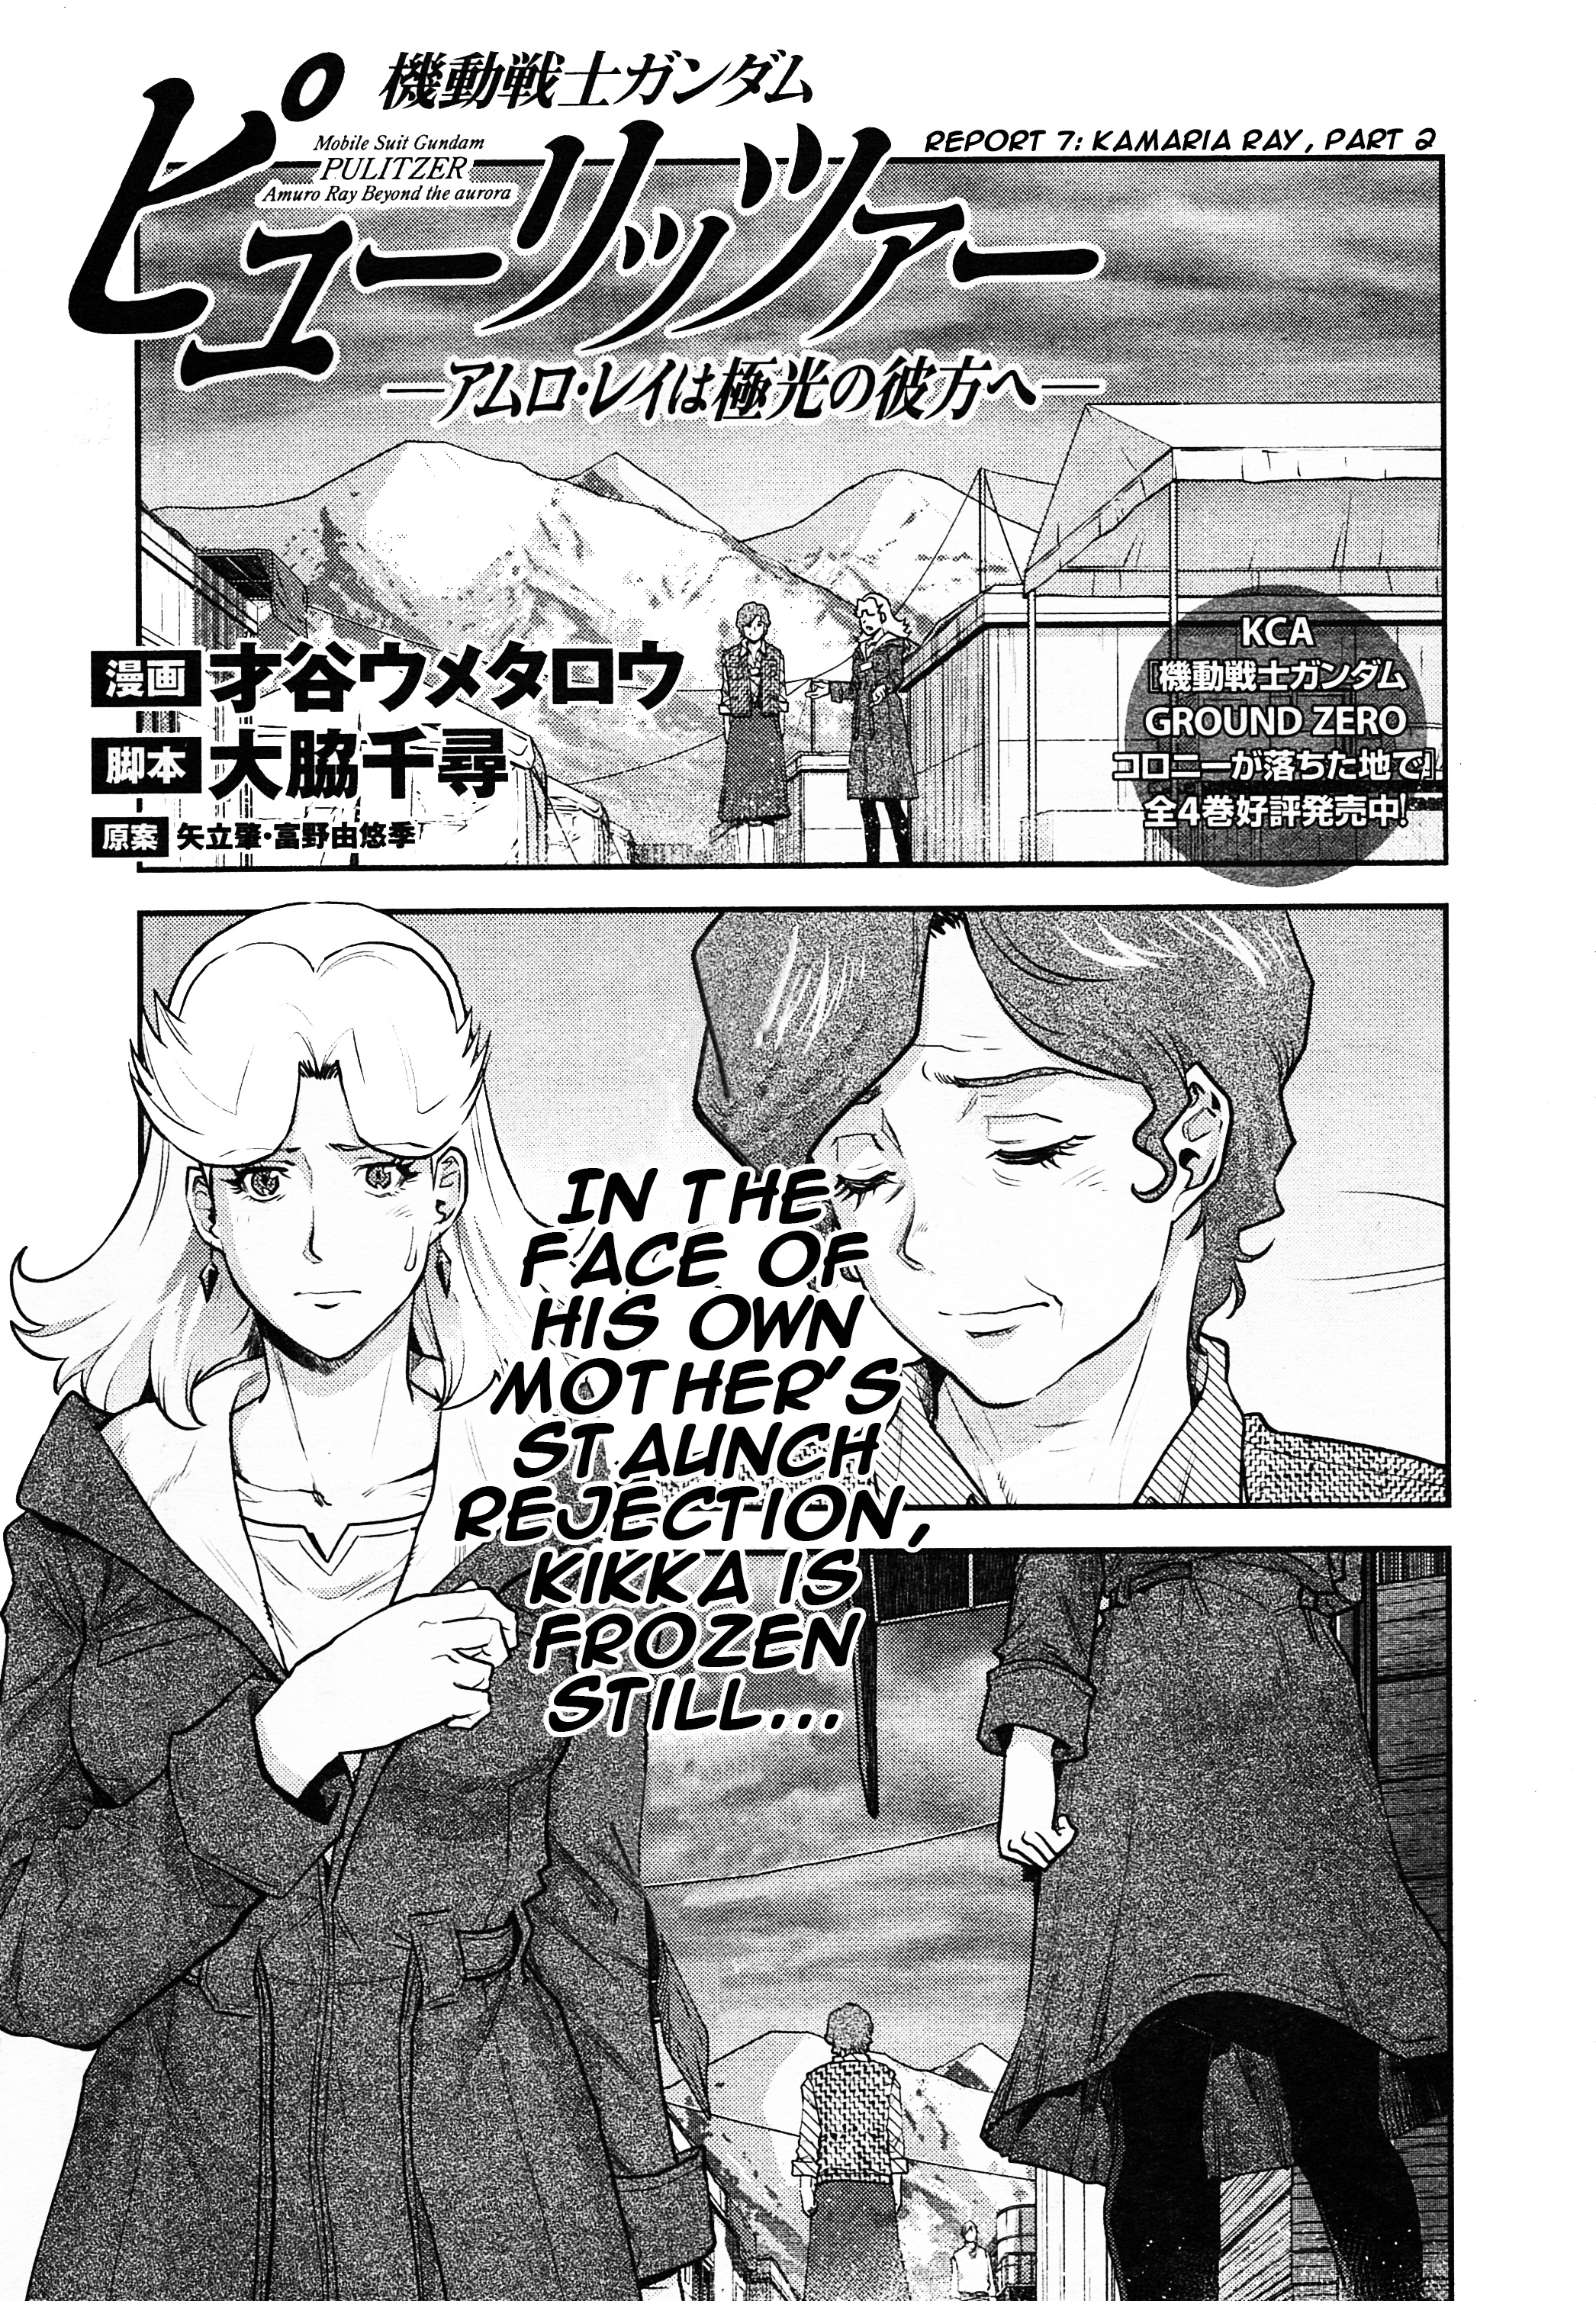 Mobile Suit Gundam Pulitzer - Amuro Ray Beyond The Aurora Vol.1 Chapter 7: Report 7: Kamaria Ray (Part 2) - Picture 1